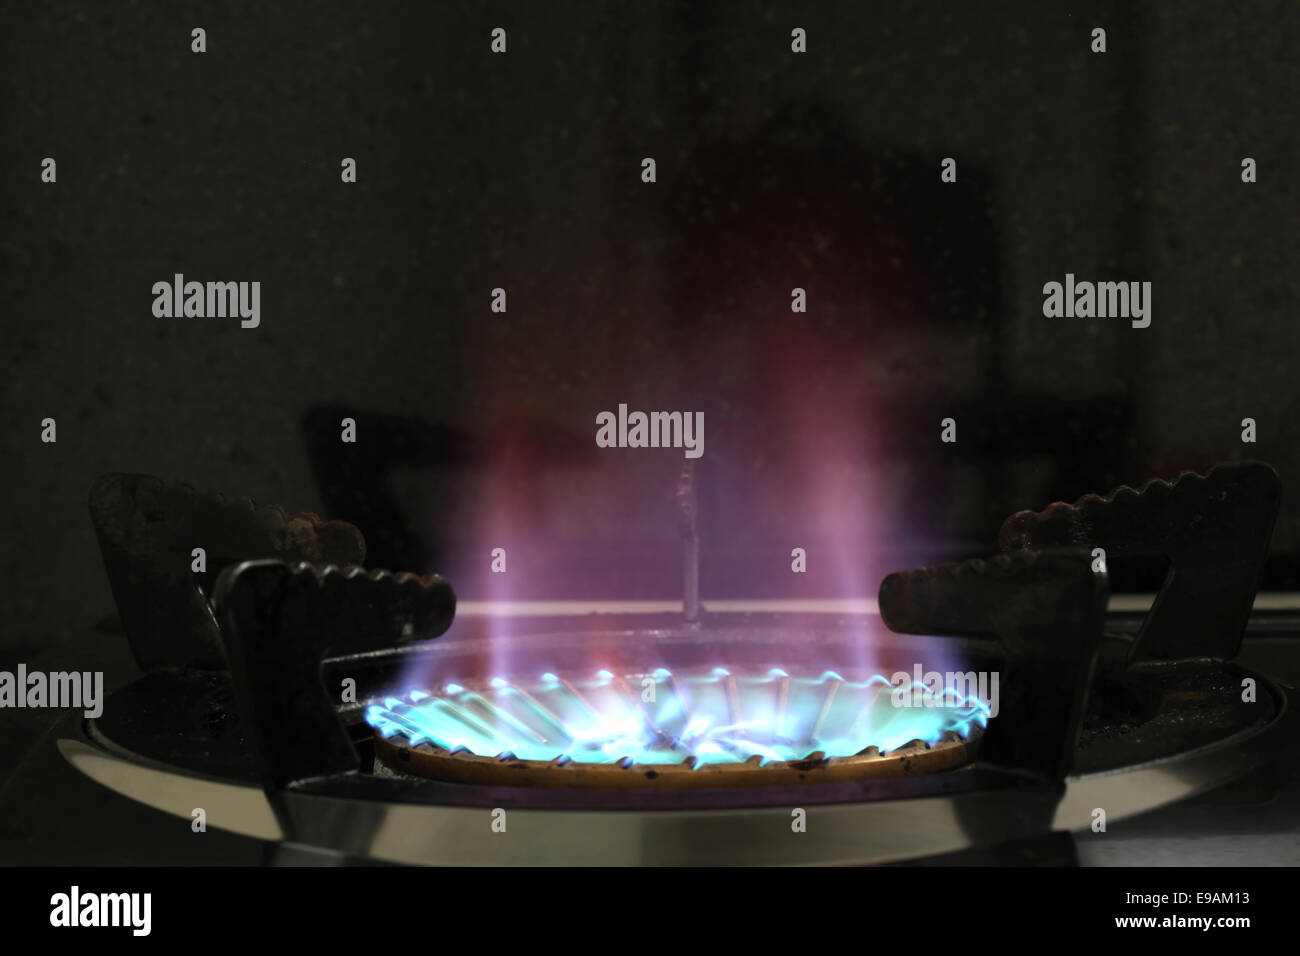 gas burner from a stove Stock Photo